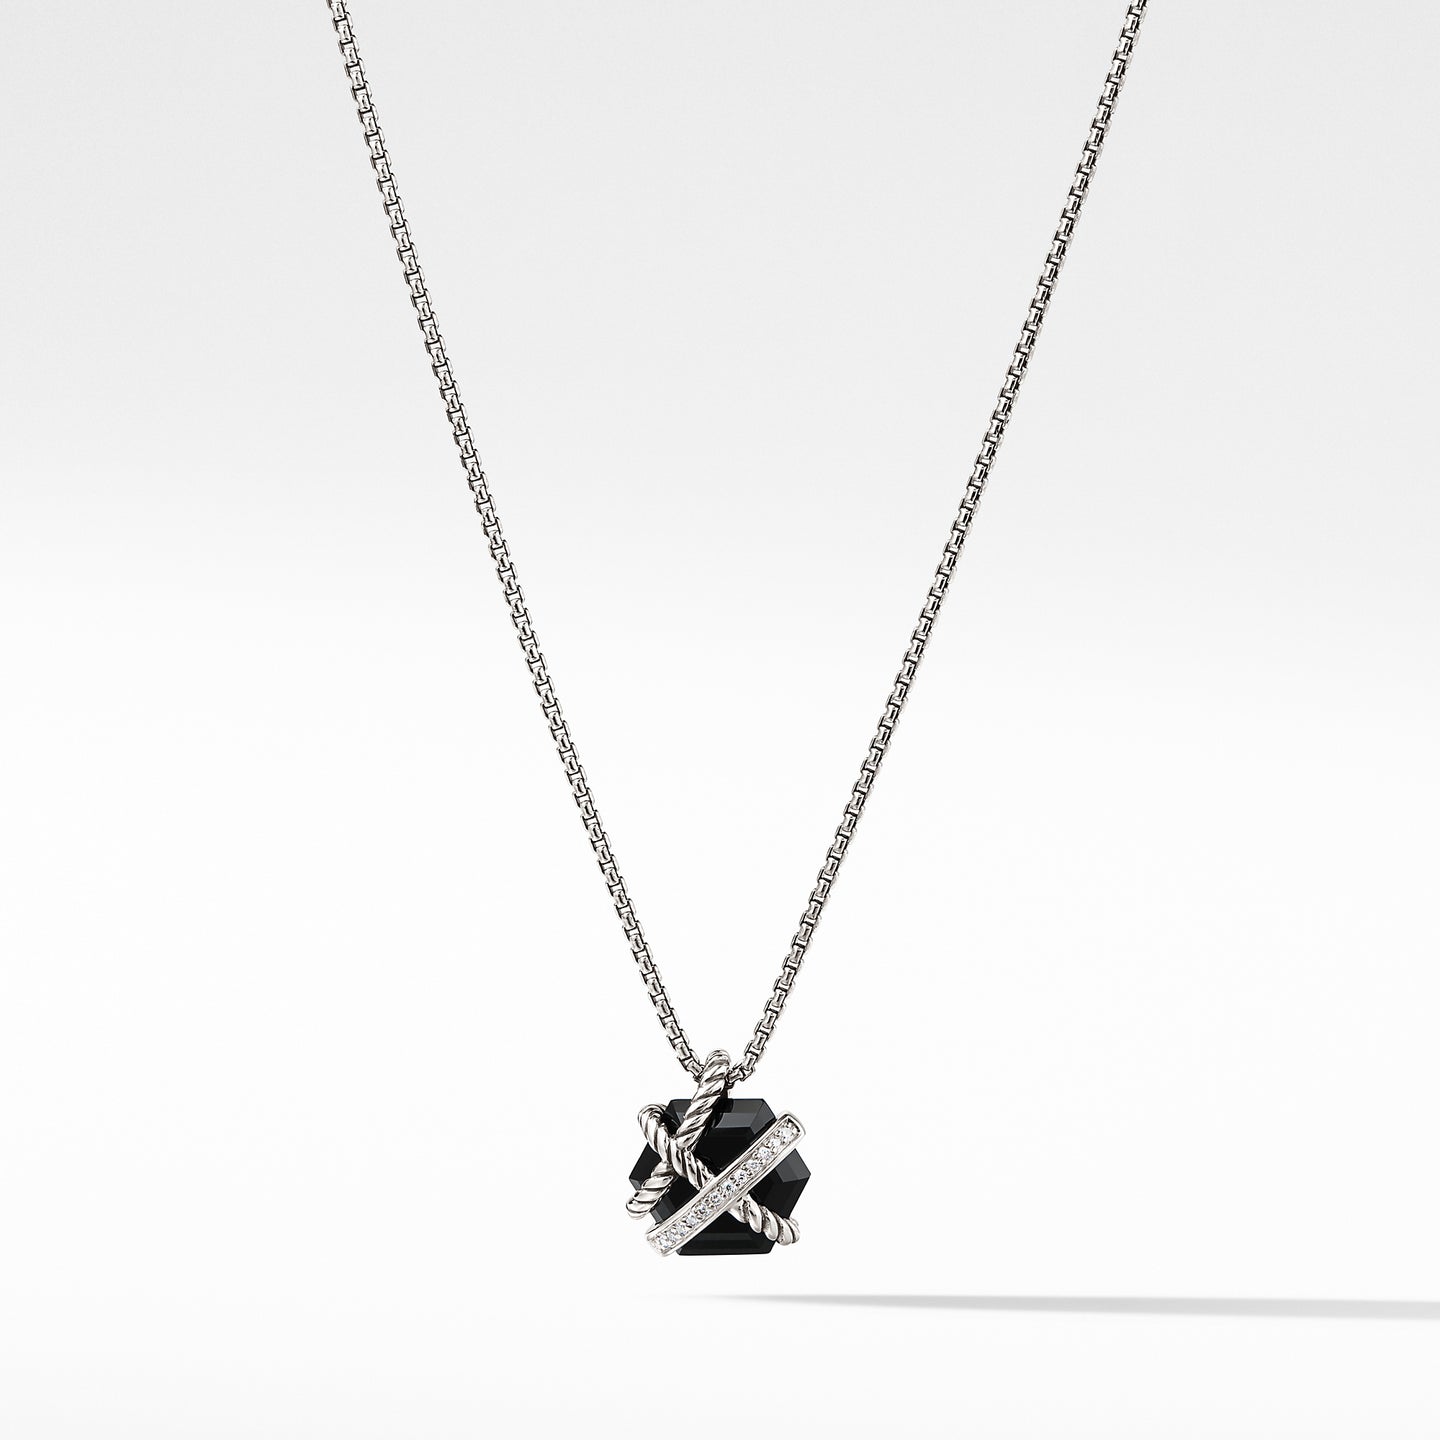 Necklace with Black Onyx and Diamonds, 17